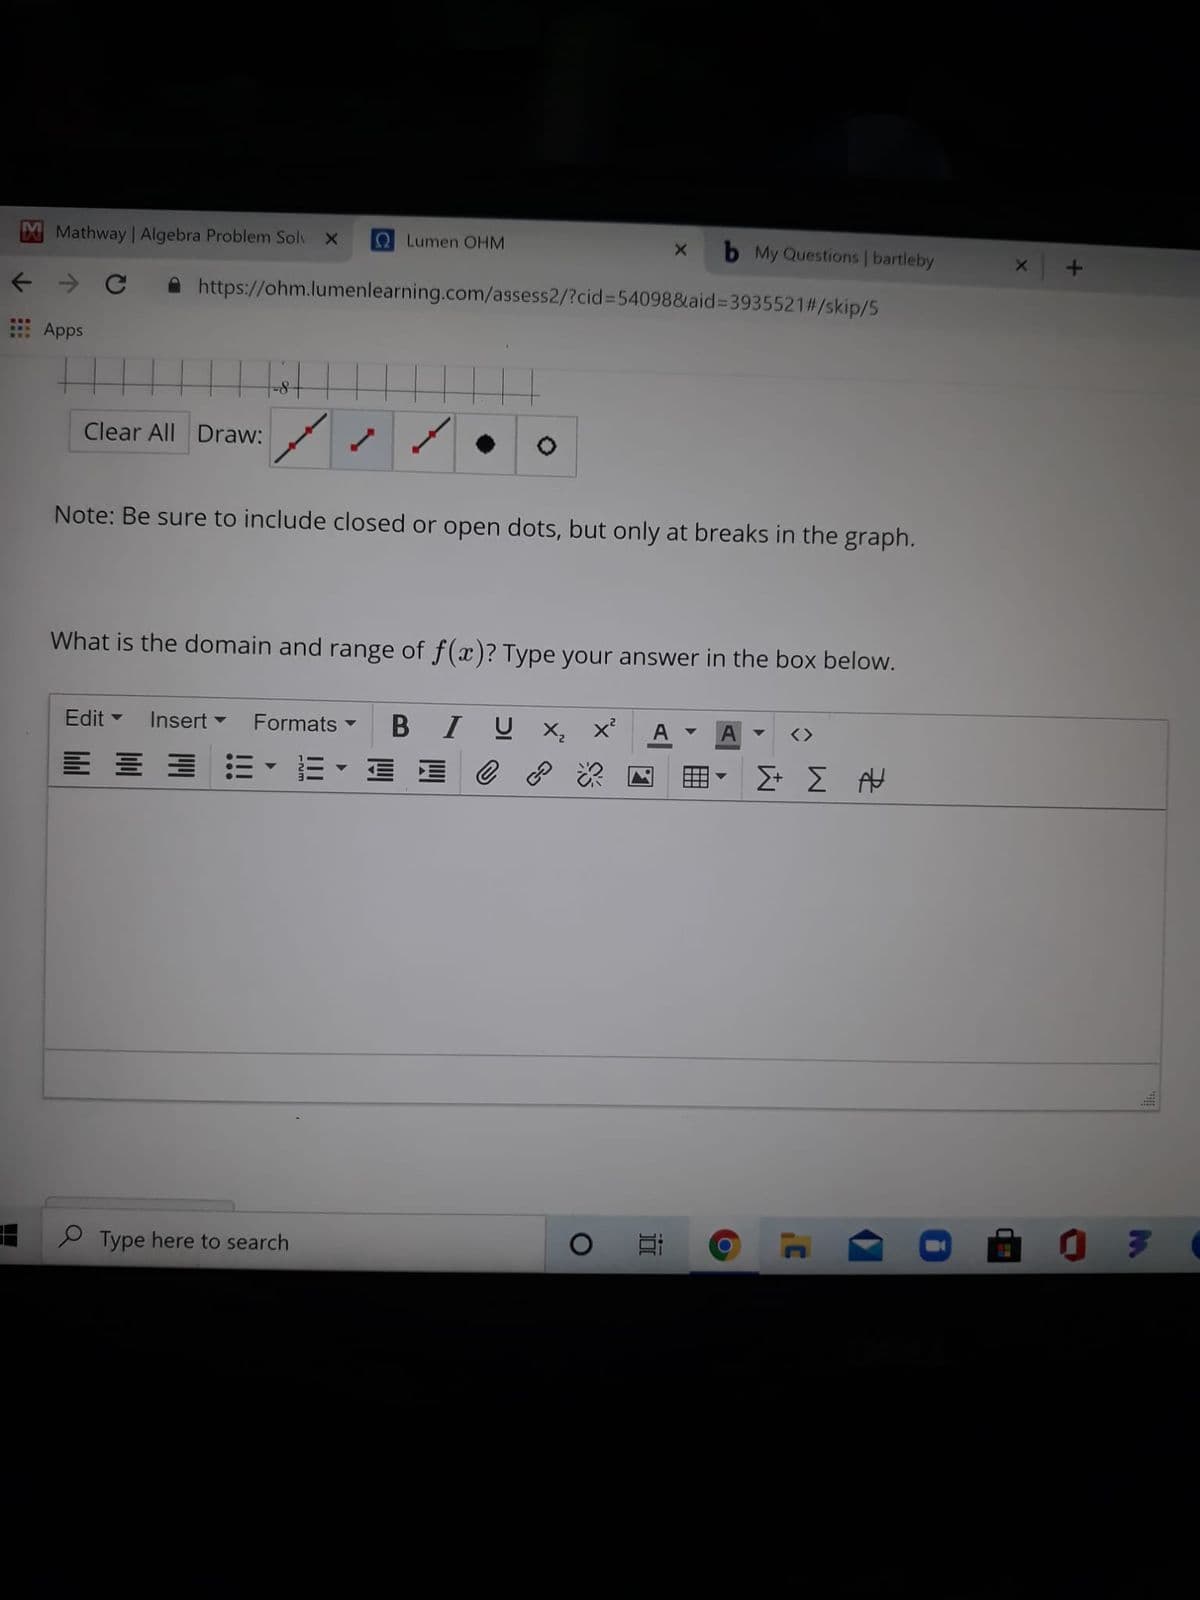 Mathway Algebra Problem Solv X
Lumen OHM
My Questions | bartleby
https://ohm.lumenlearning.com/assess2/?cid%3D54098&aid%3935521#/skip/5
Apps
Clear All Draw:
Note: Be sure to include closed or open dots, but only at breaks in the graph.
What is the domain and range of f(x)? Type your answer in the box below.
Edit
Insert -
Formats
I U x, x
A
<>
E E 3 E• E - E E
田
Σ Σ Η
P Type here to search
